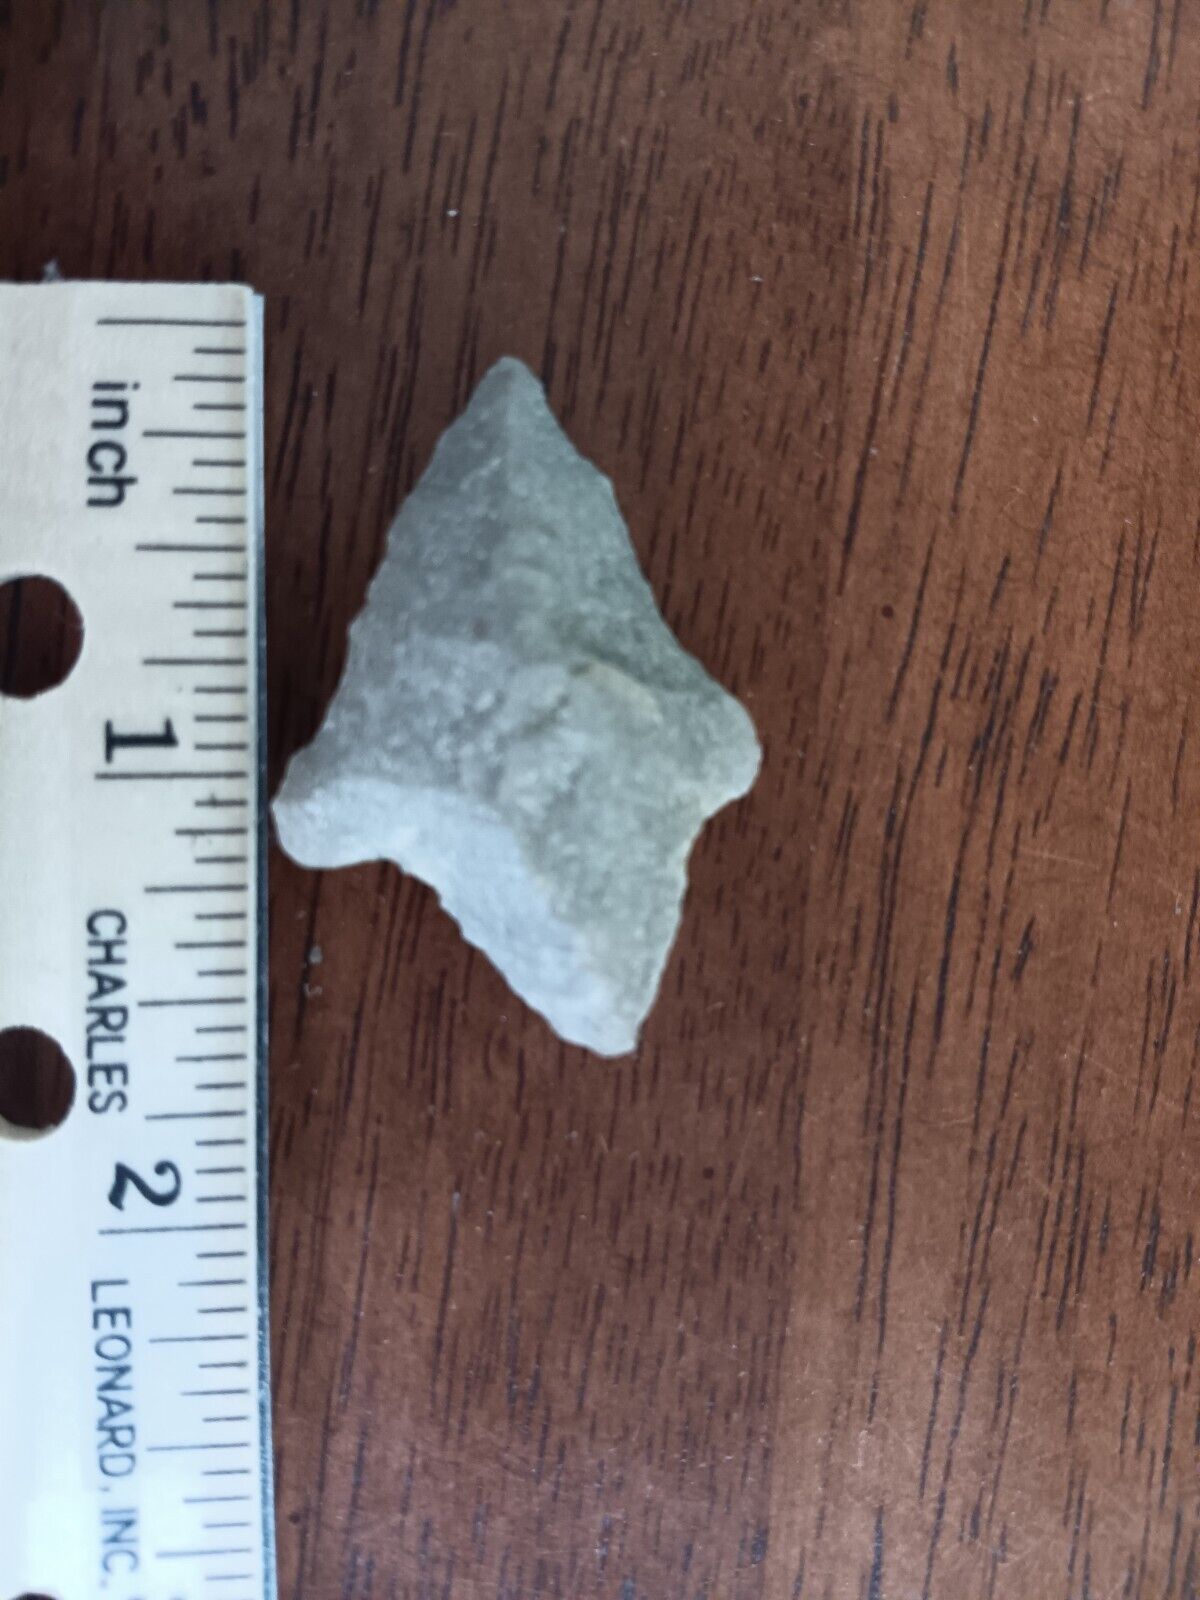 AUTHENTIC NATIVE AMERICAN INDIAN ARTIFACT FOUND, EASTERN N.C.--- OOO/24